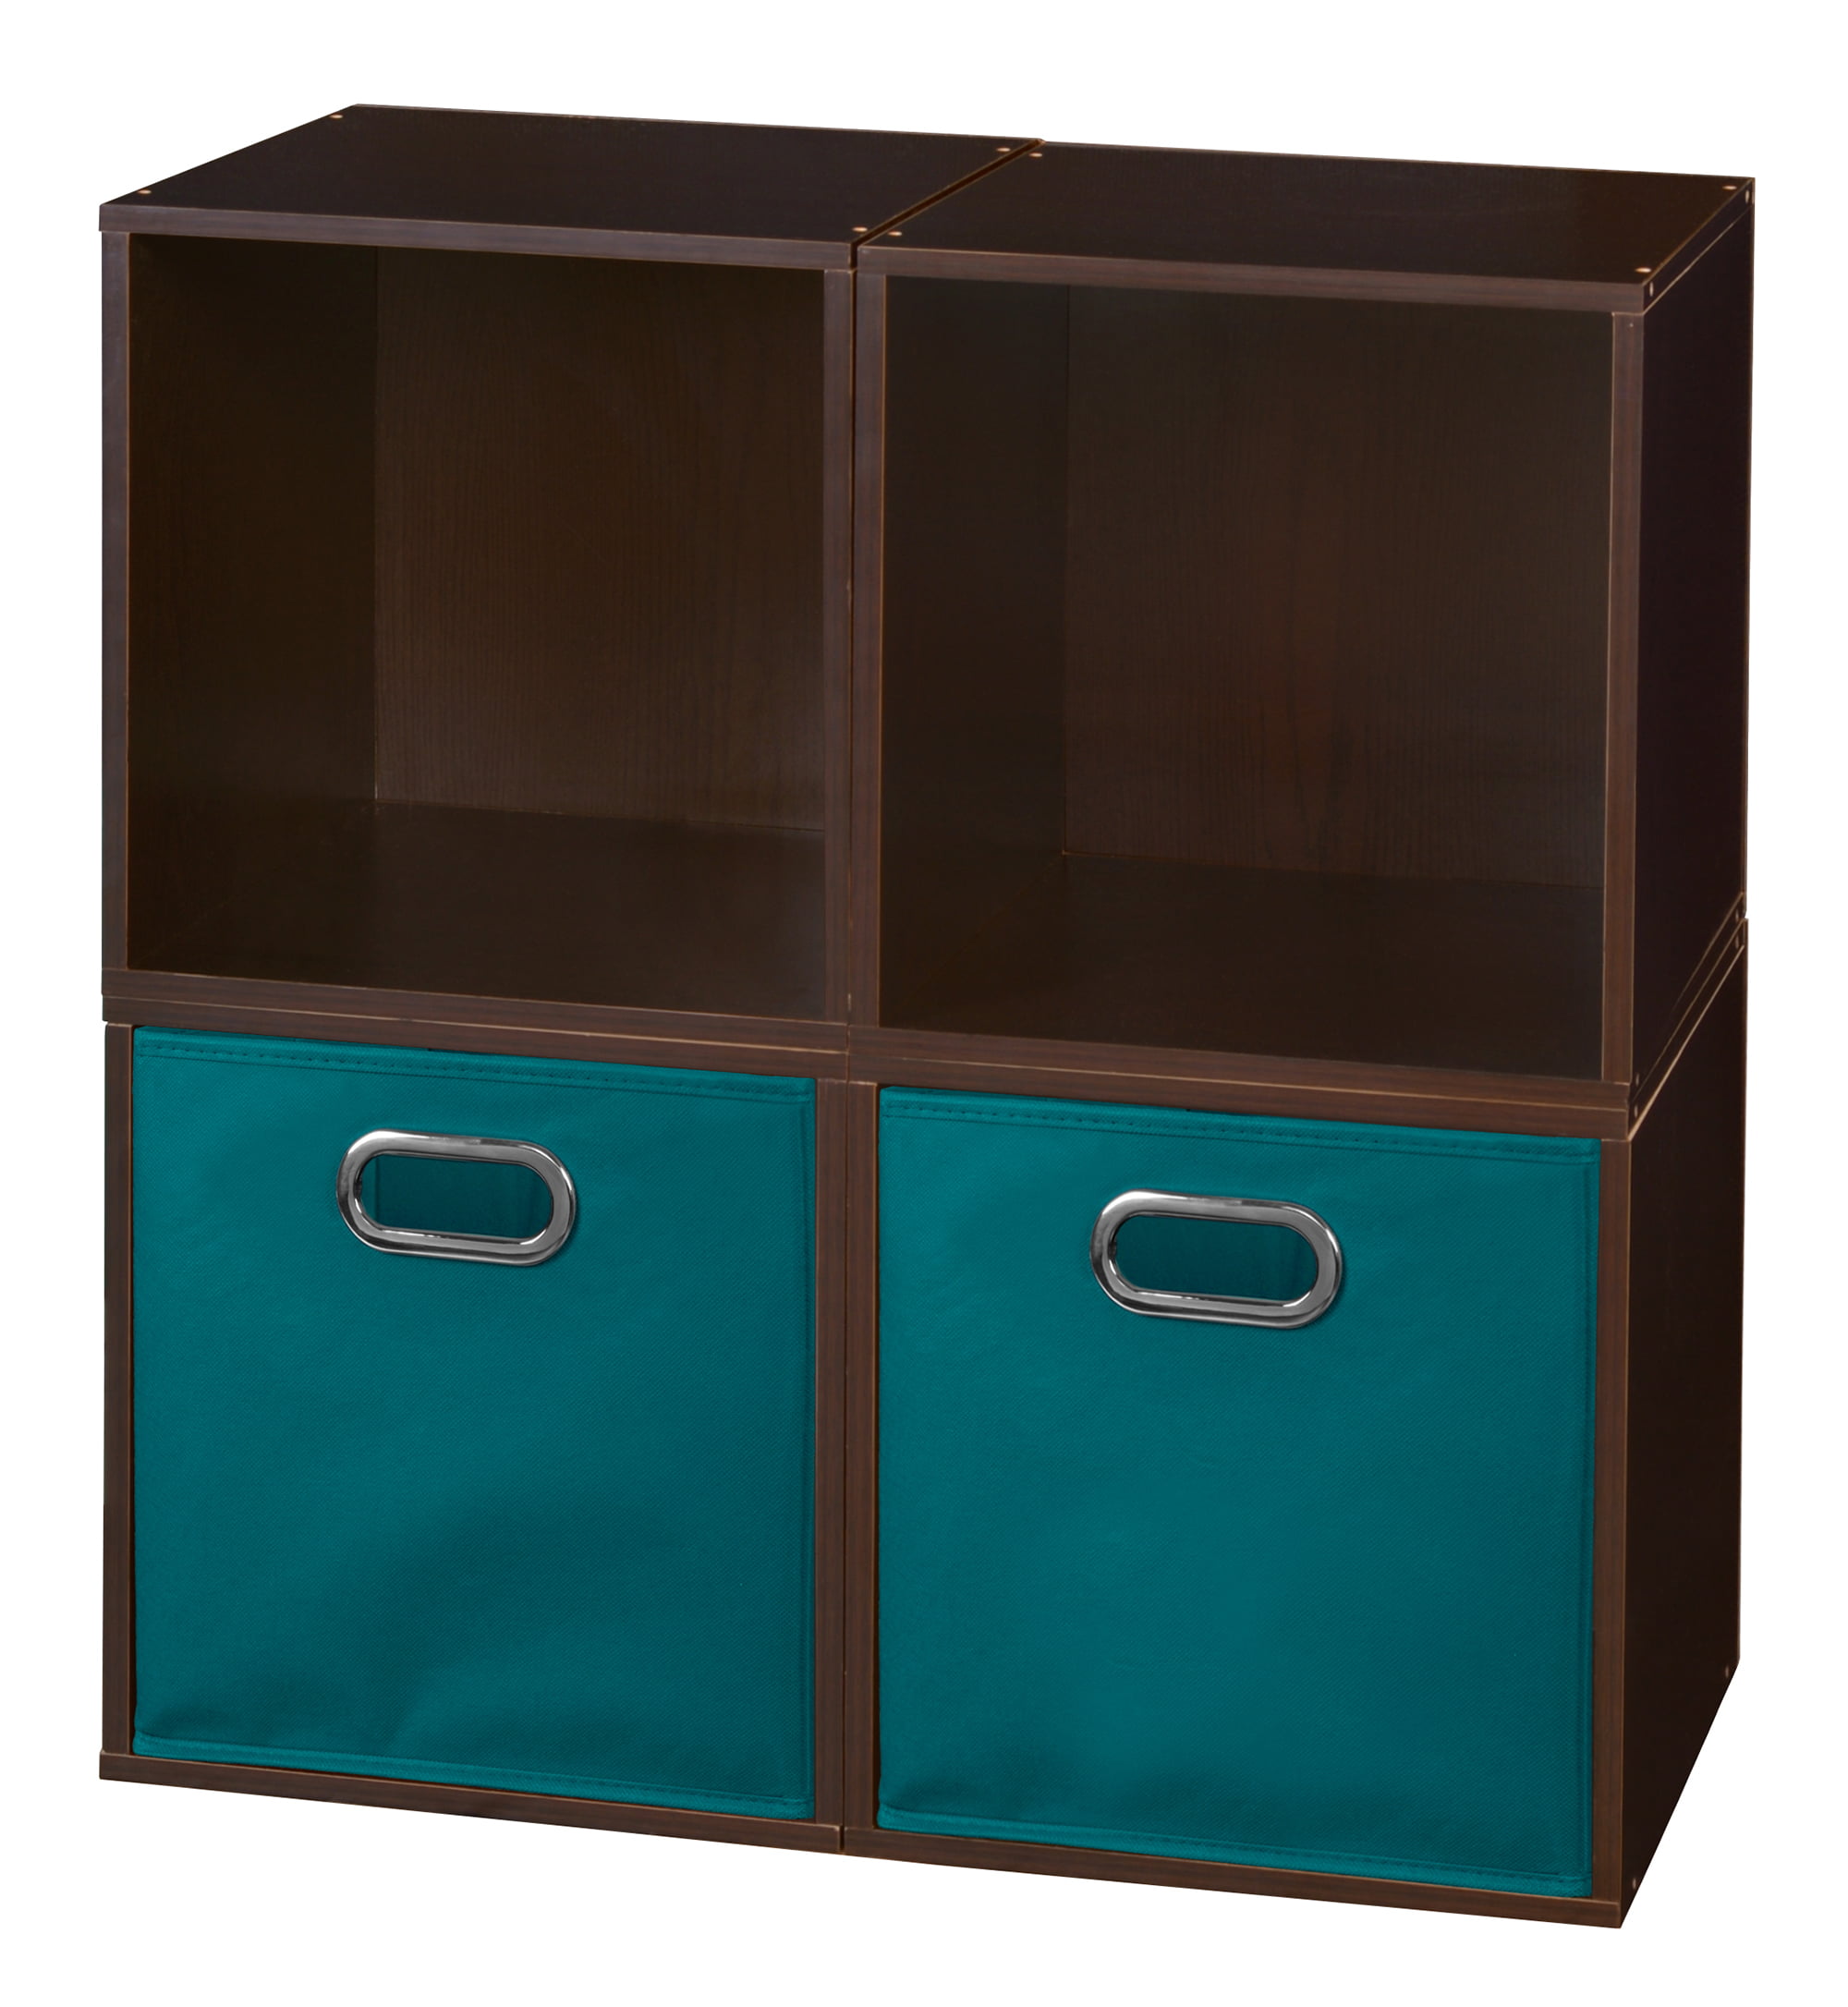 Niche Cubo Storage Set - 4 Cubes and 2 Canvas Bins- Truffle/Teal ...